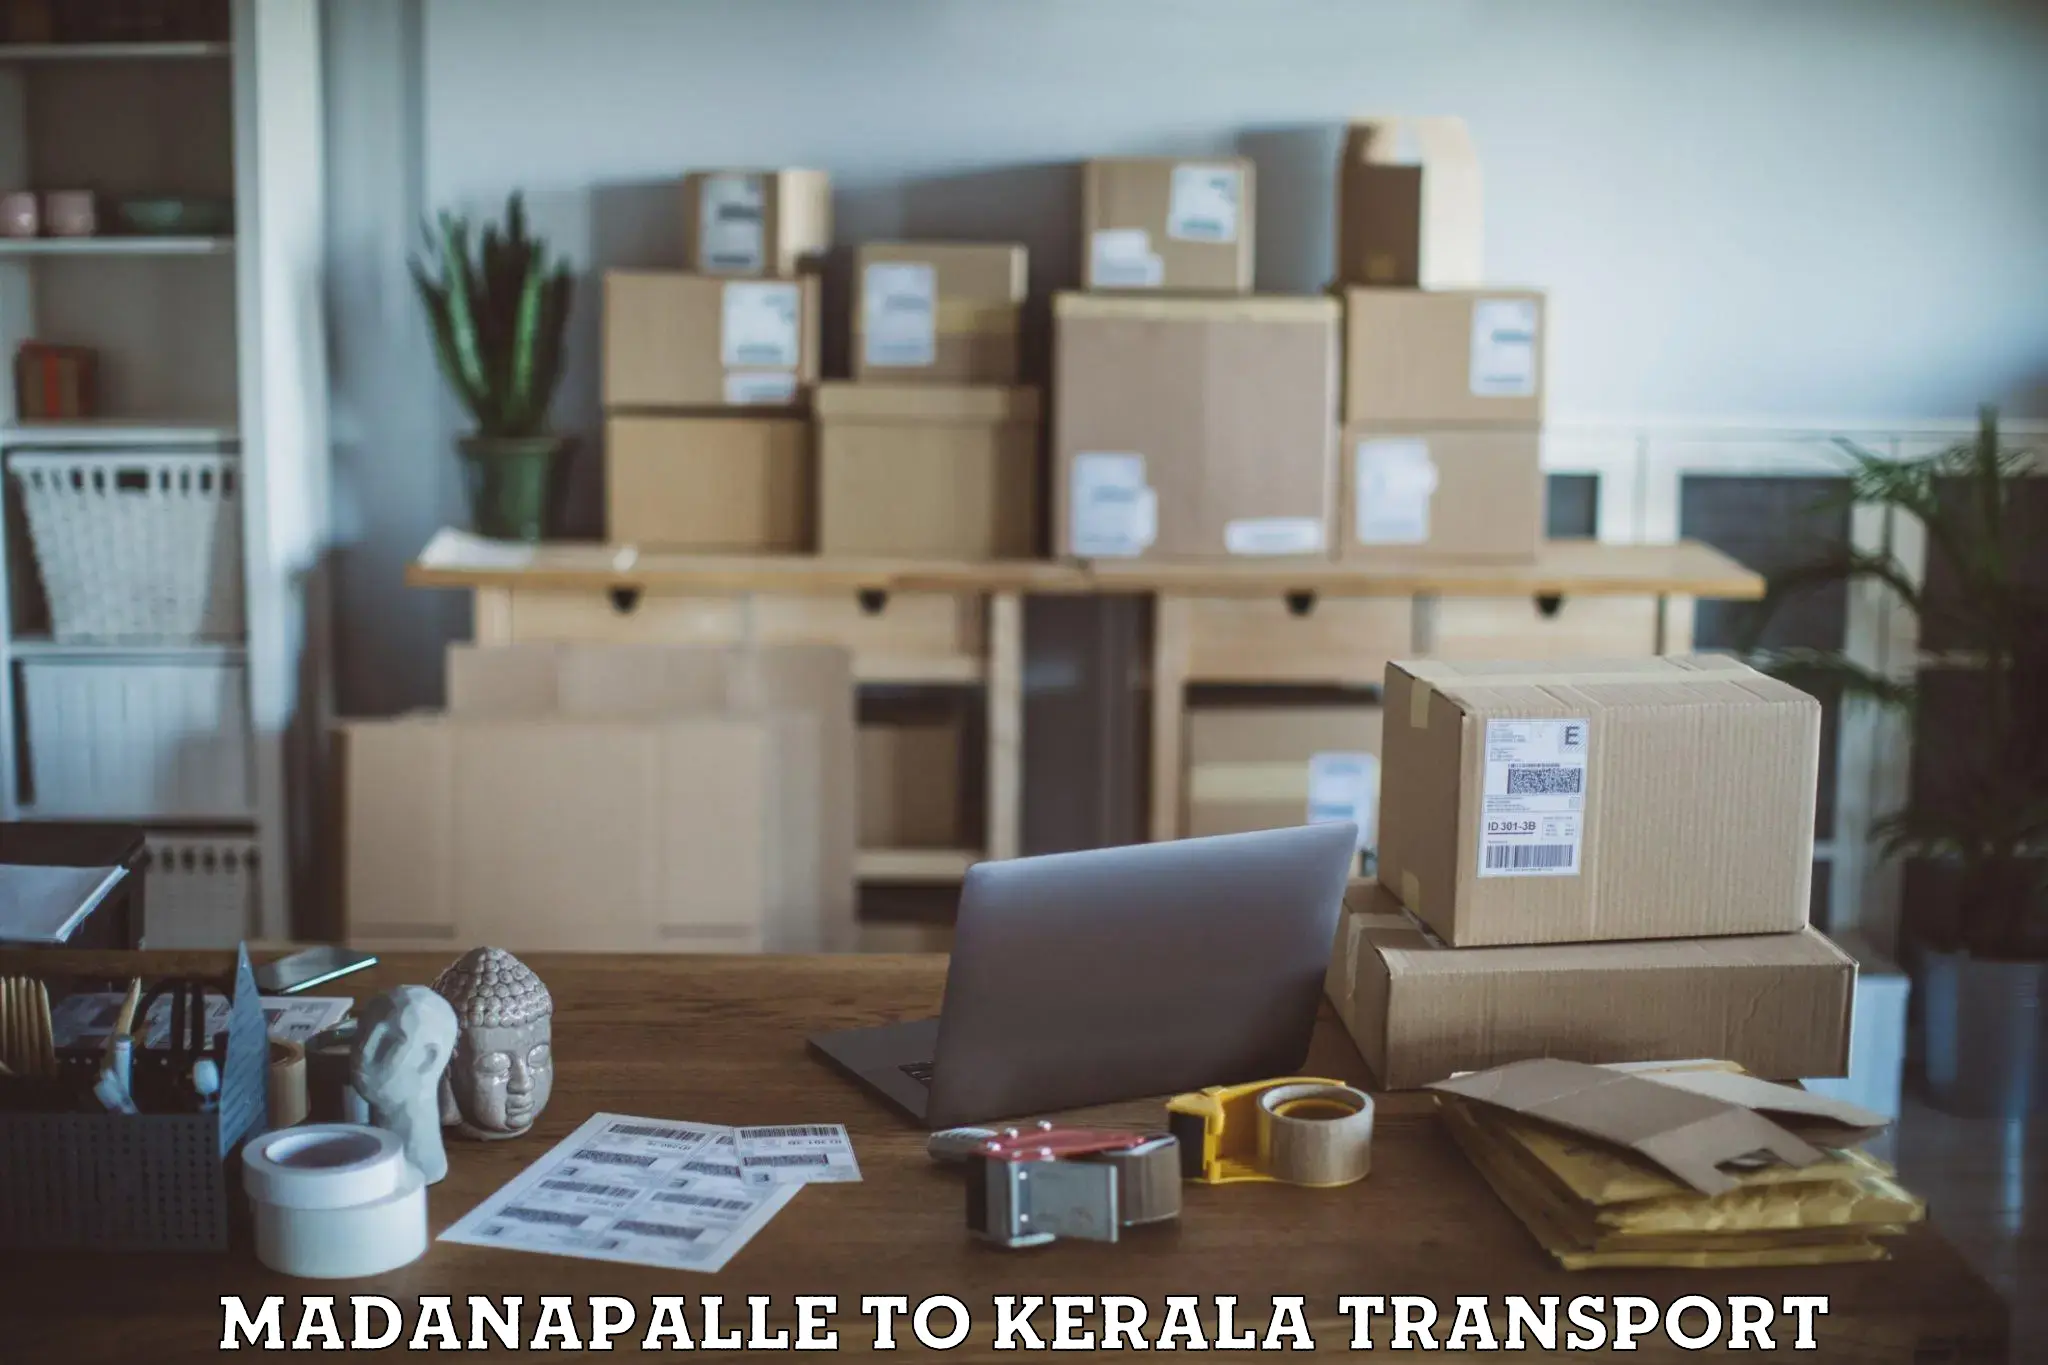 Transport bike from one state to another Madanapalle to Kerala